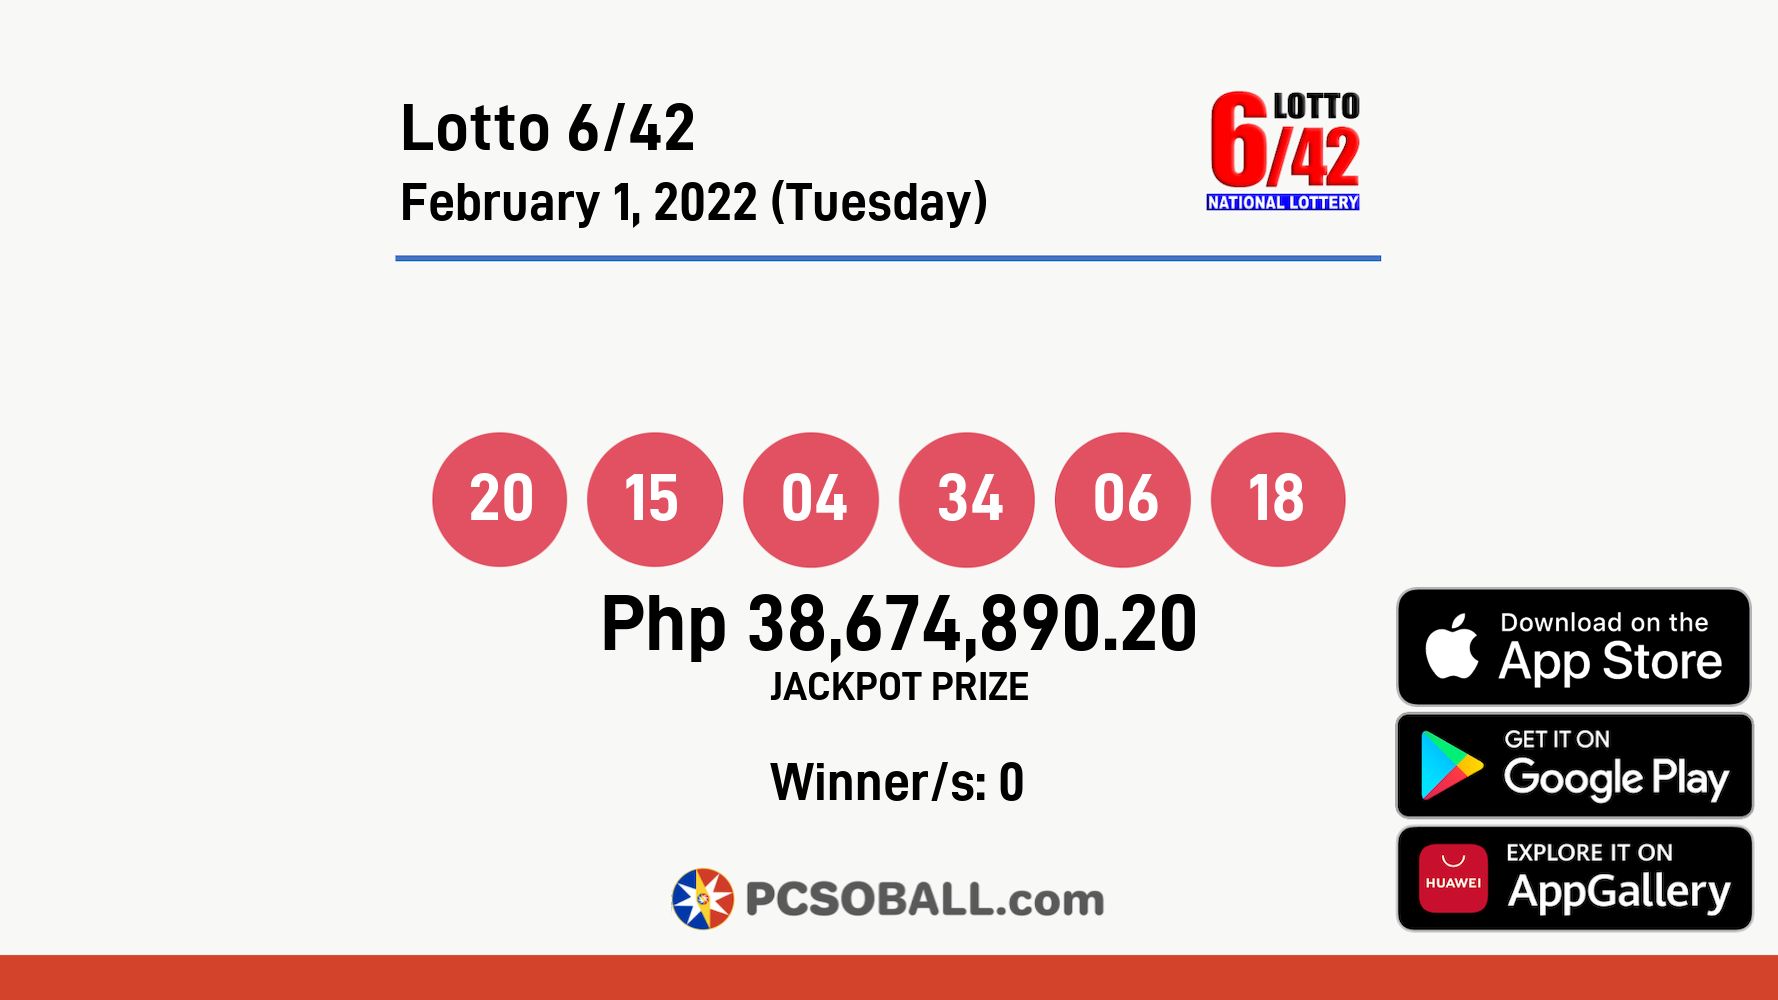 Lotto 6/42 February 1, 2022 (Tuesday) Result